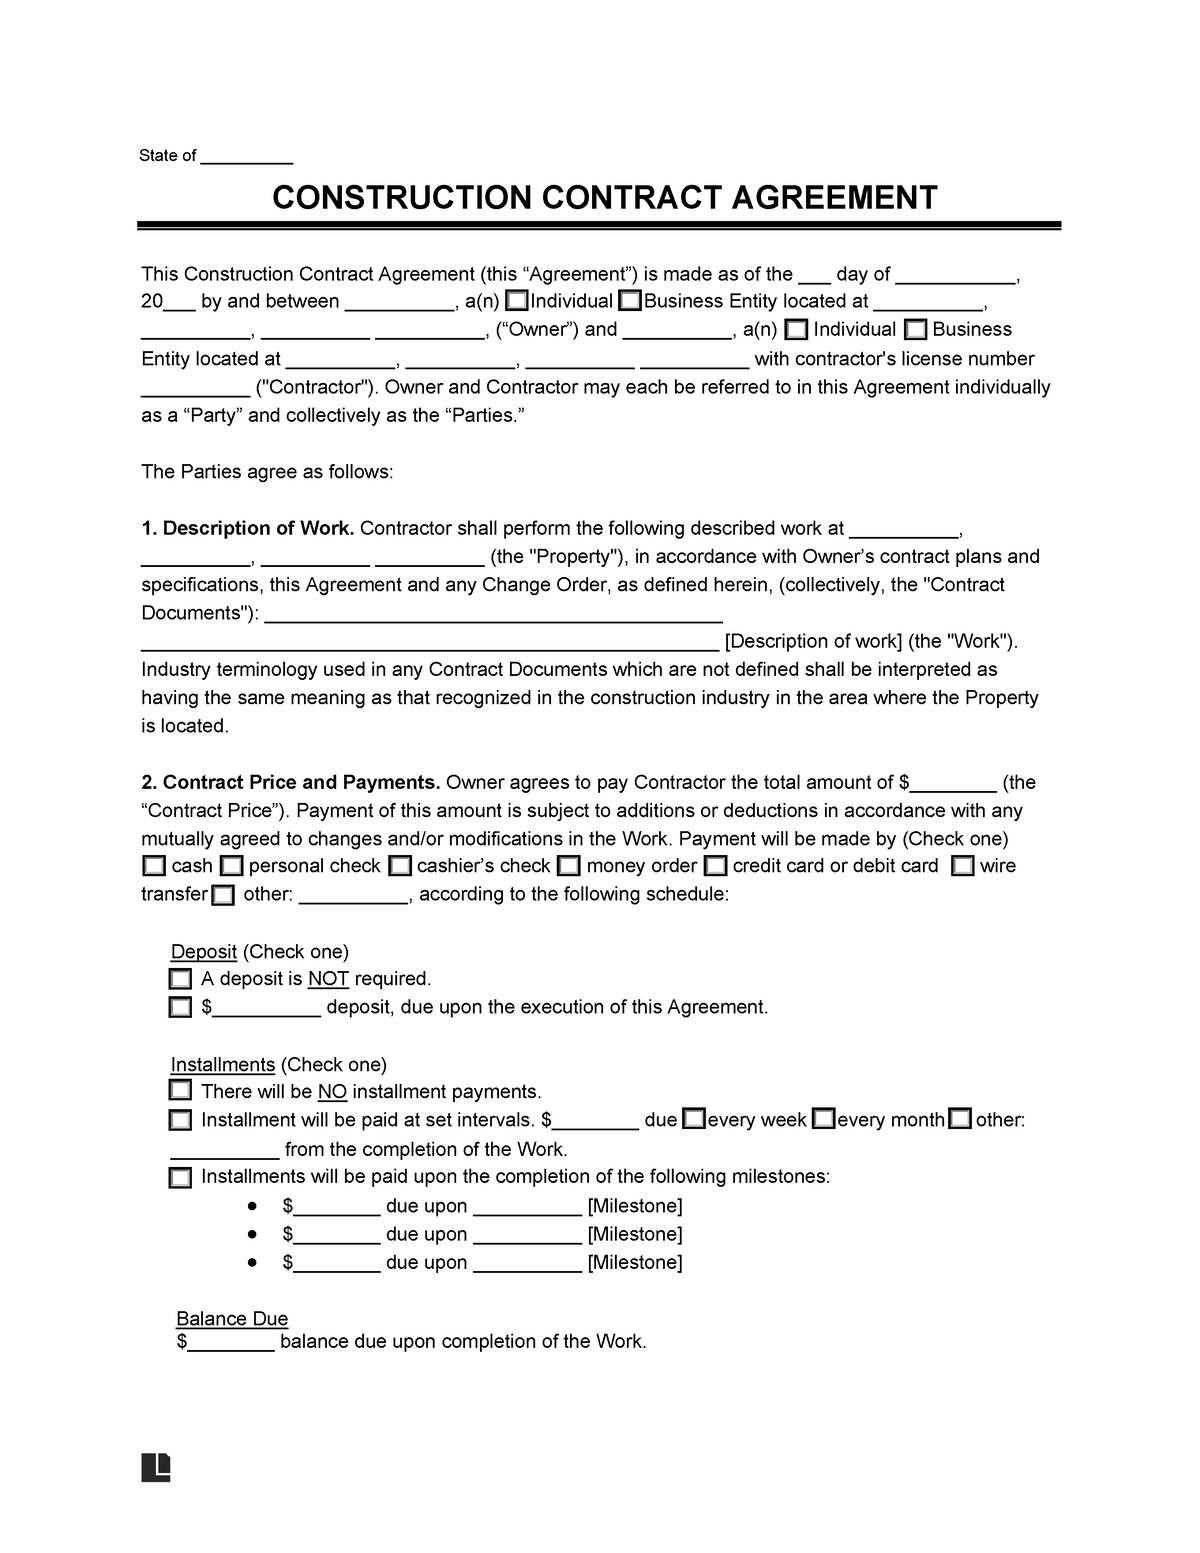 Construction contract template State of CONSTRUCTION